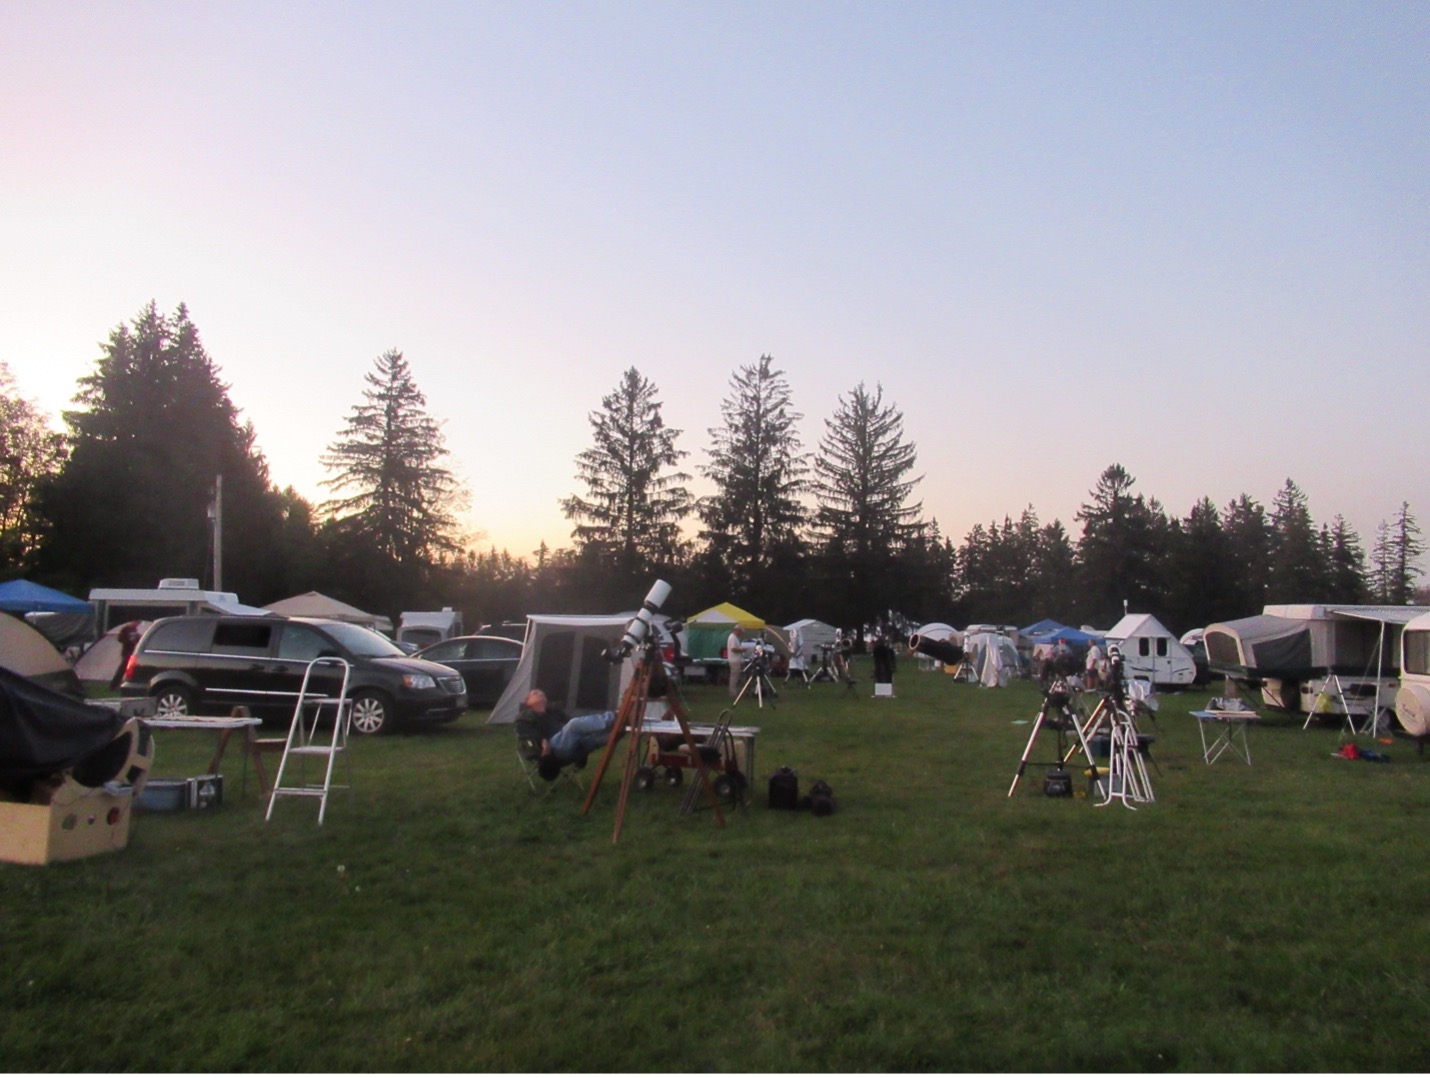 Tents, cars, and telescopes on a field beneath a blue and pink sky.